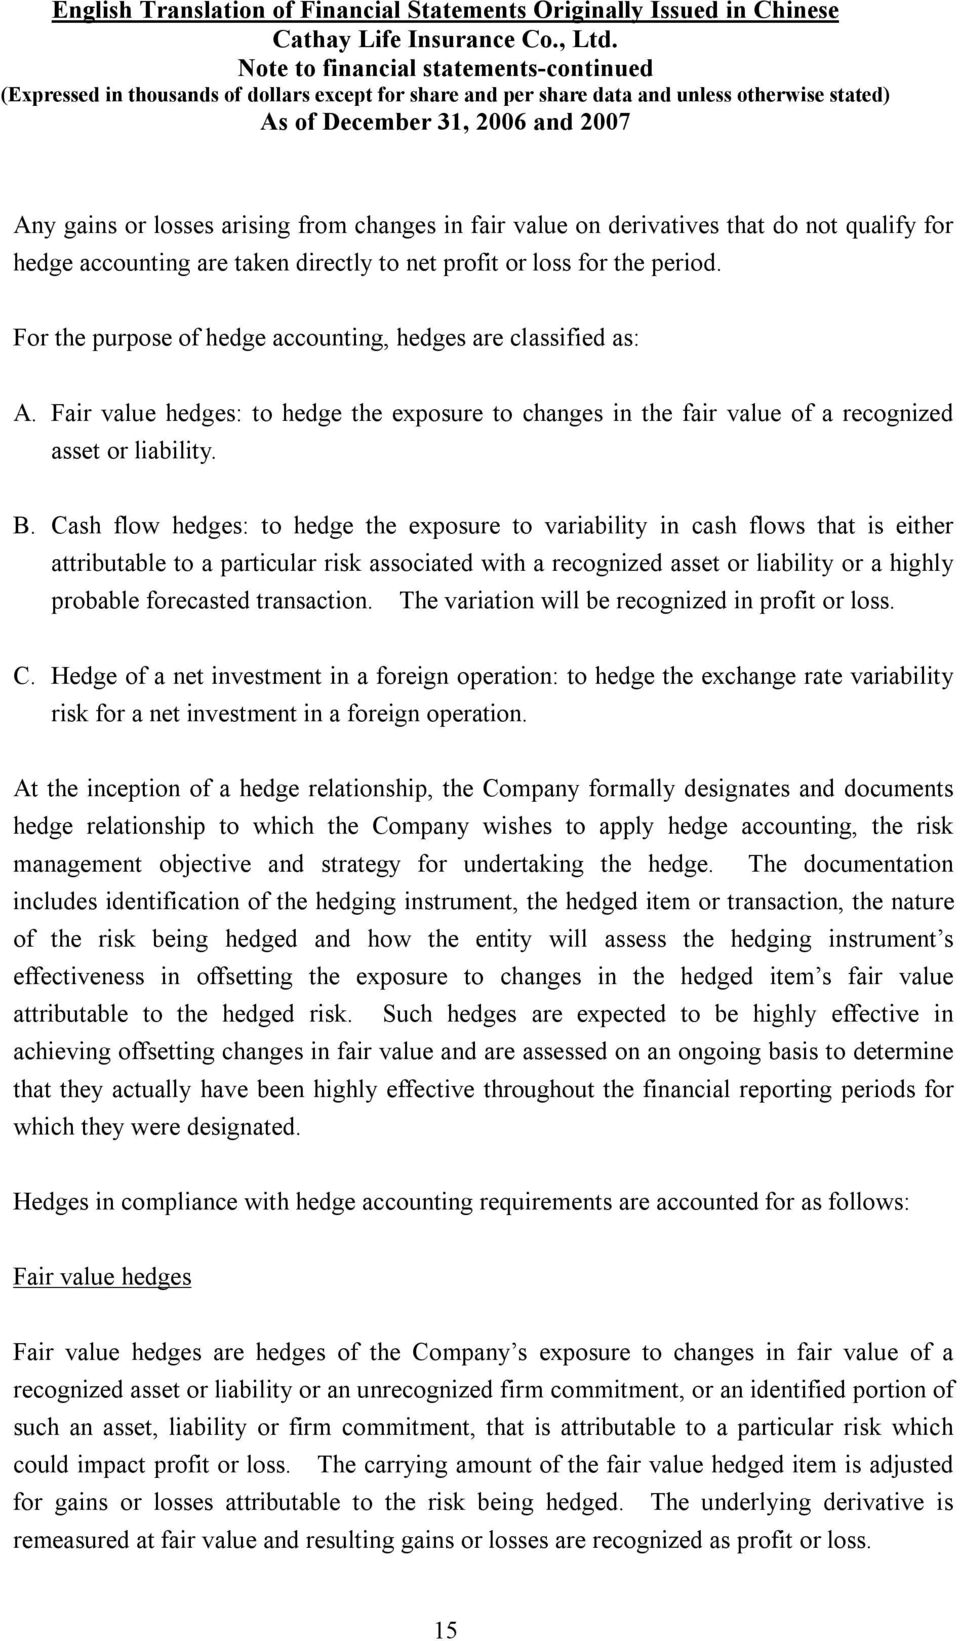 Cash flow hedges: to hedge the exposure to variability in cash flows that is either attributable to a particular risk associated with a recognized asset or liability or a highly probable forecasted